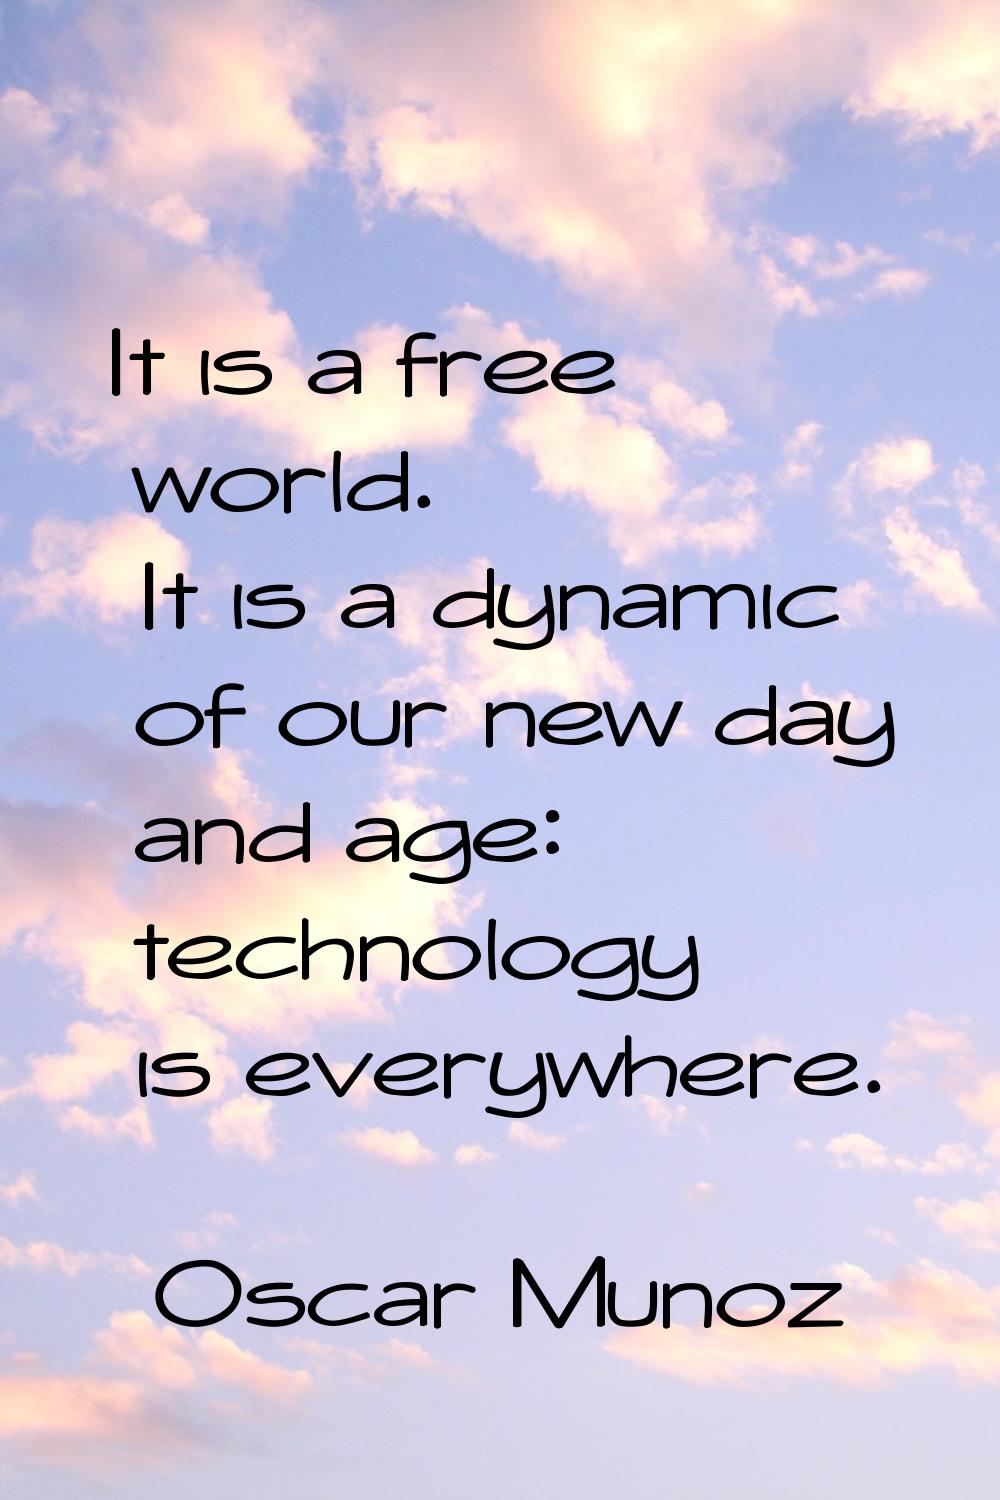 It is a free world. It is a dynamic of our new day and age: technology is everywhere.